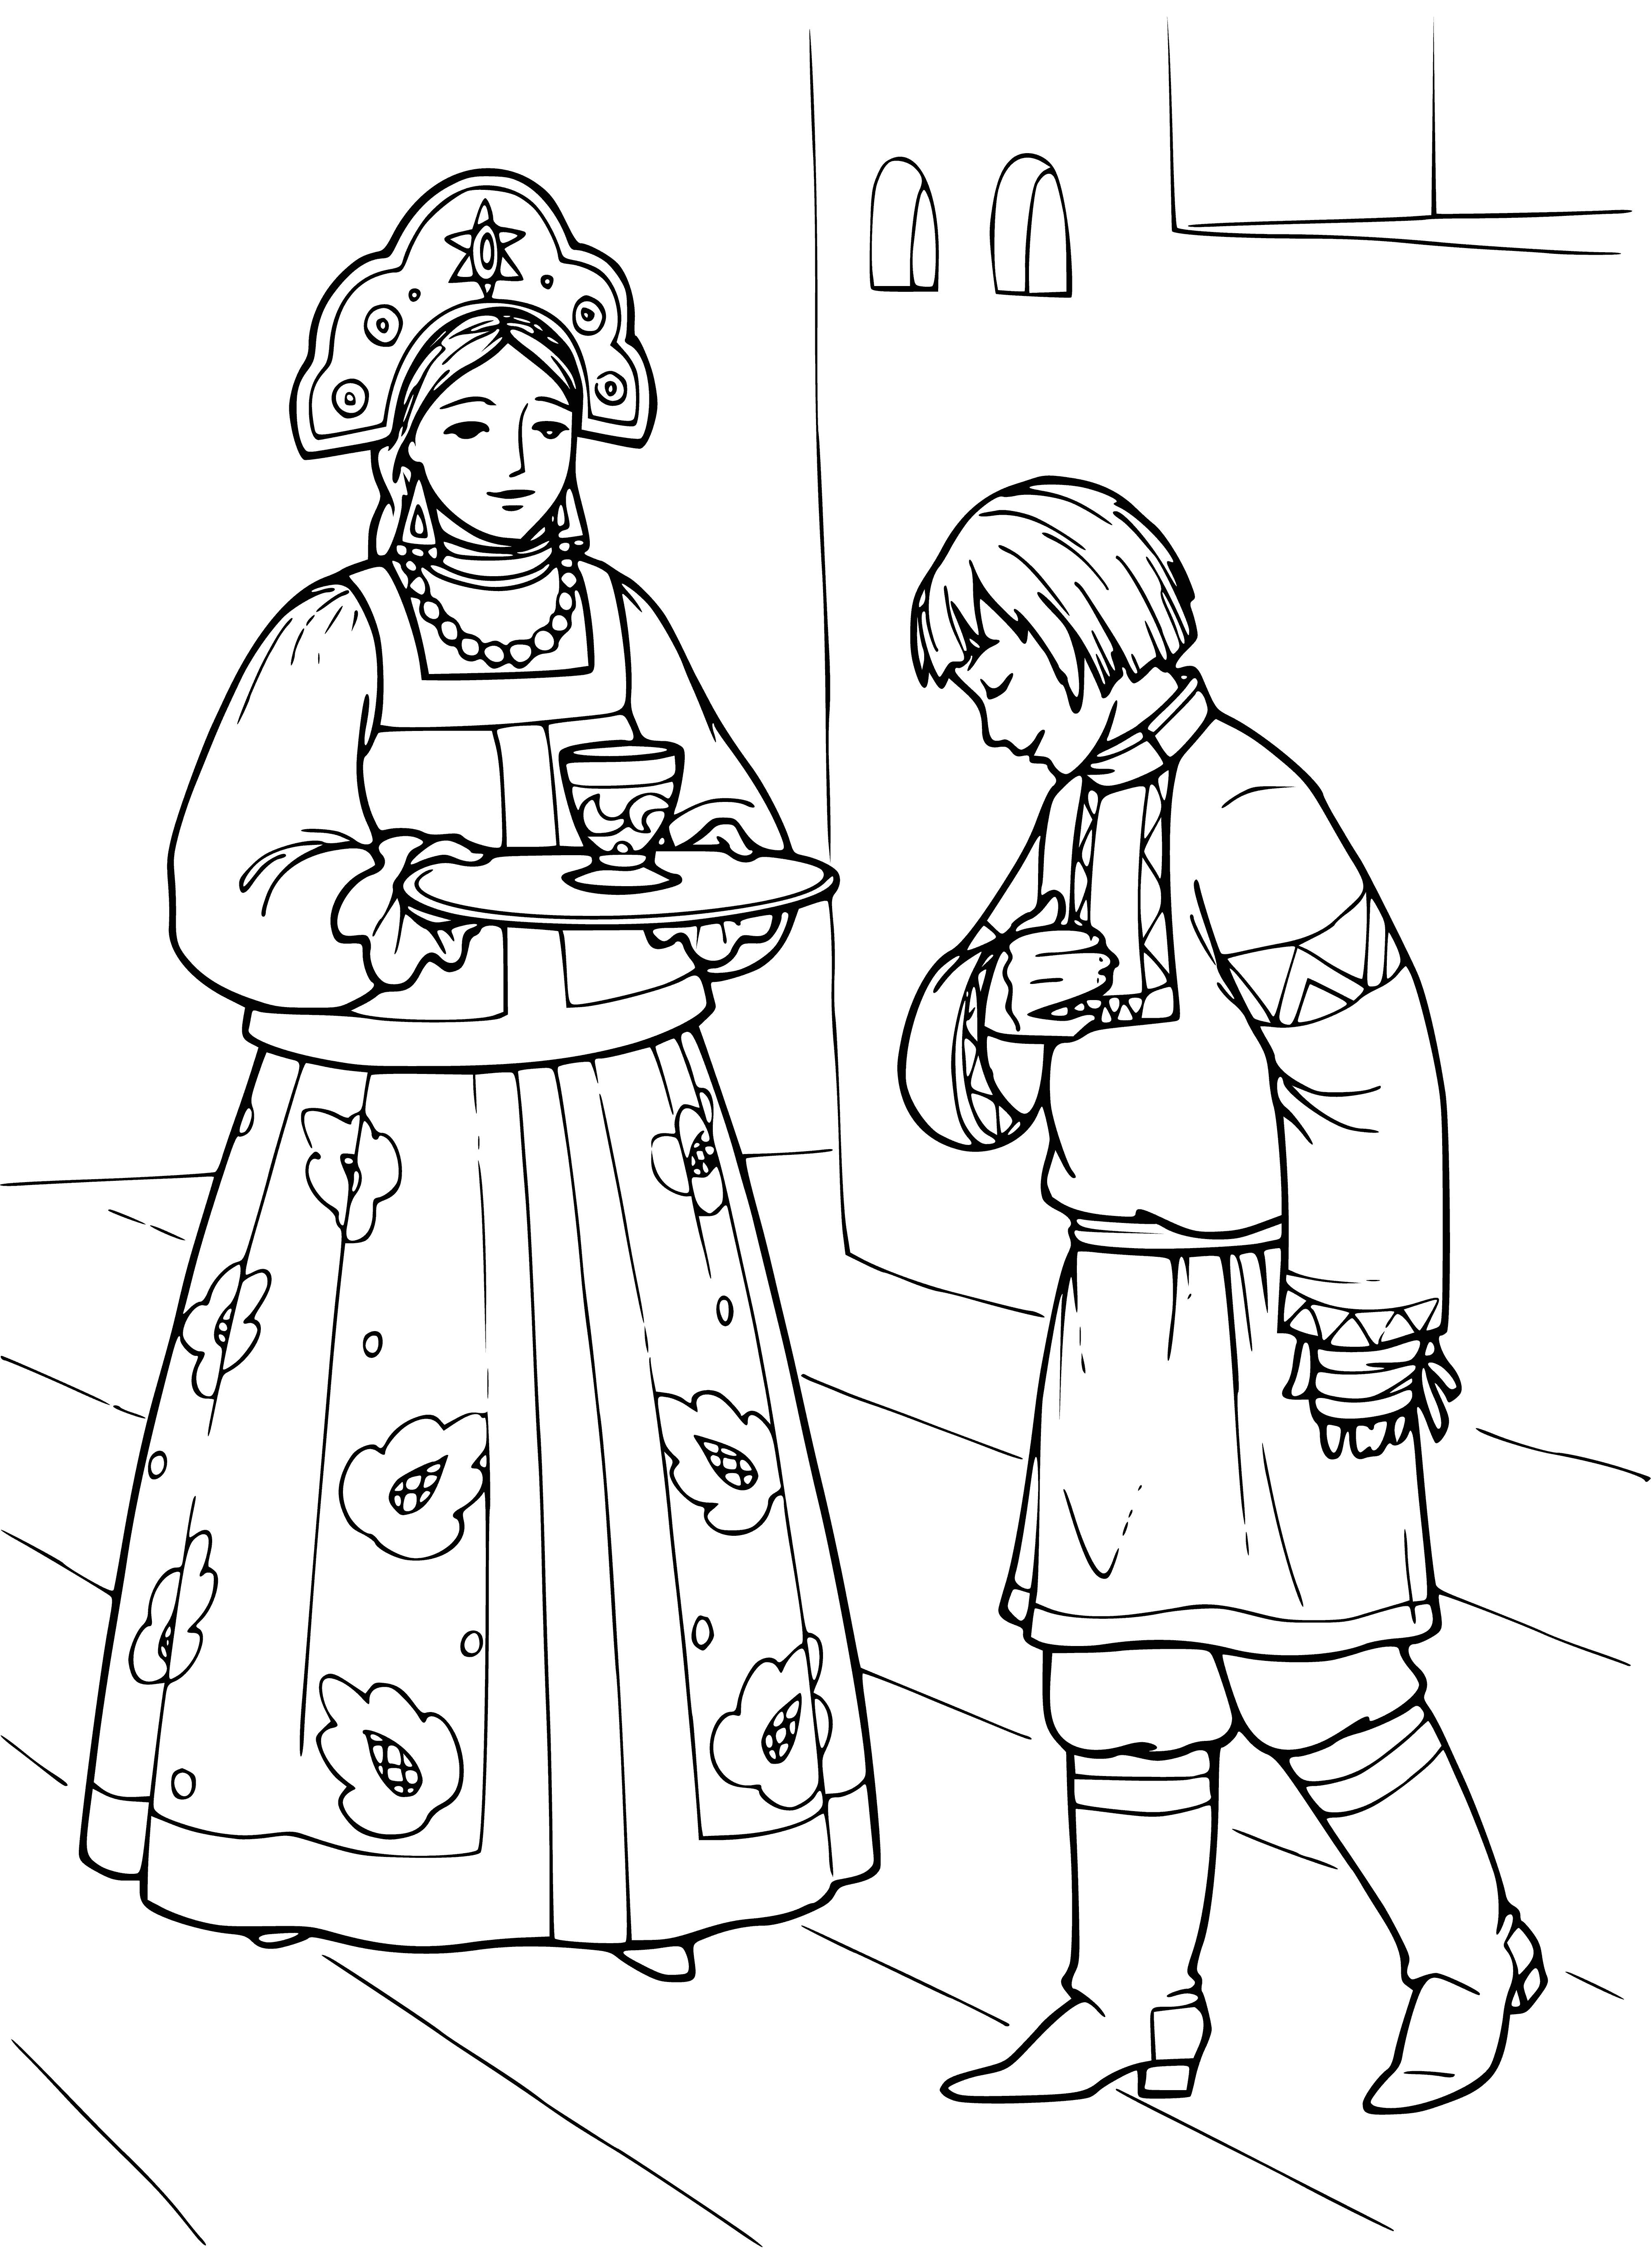 coloring page: Tsar Maiden loves a small, humpbacked horse with a castle in the background. #fairytale